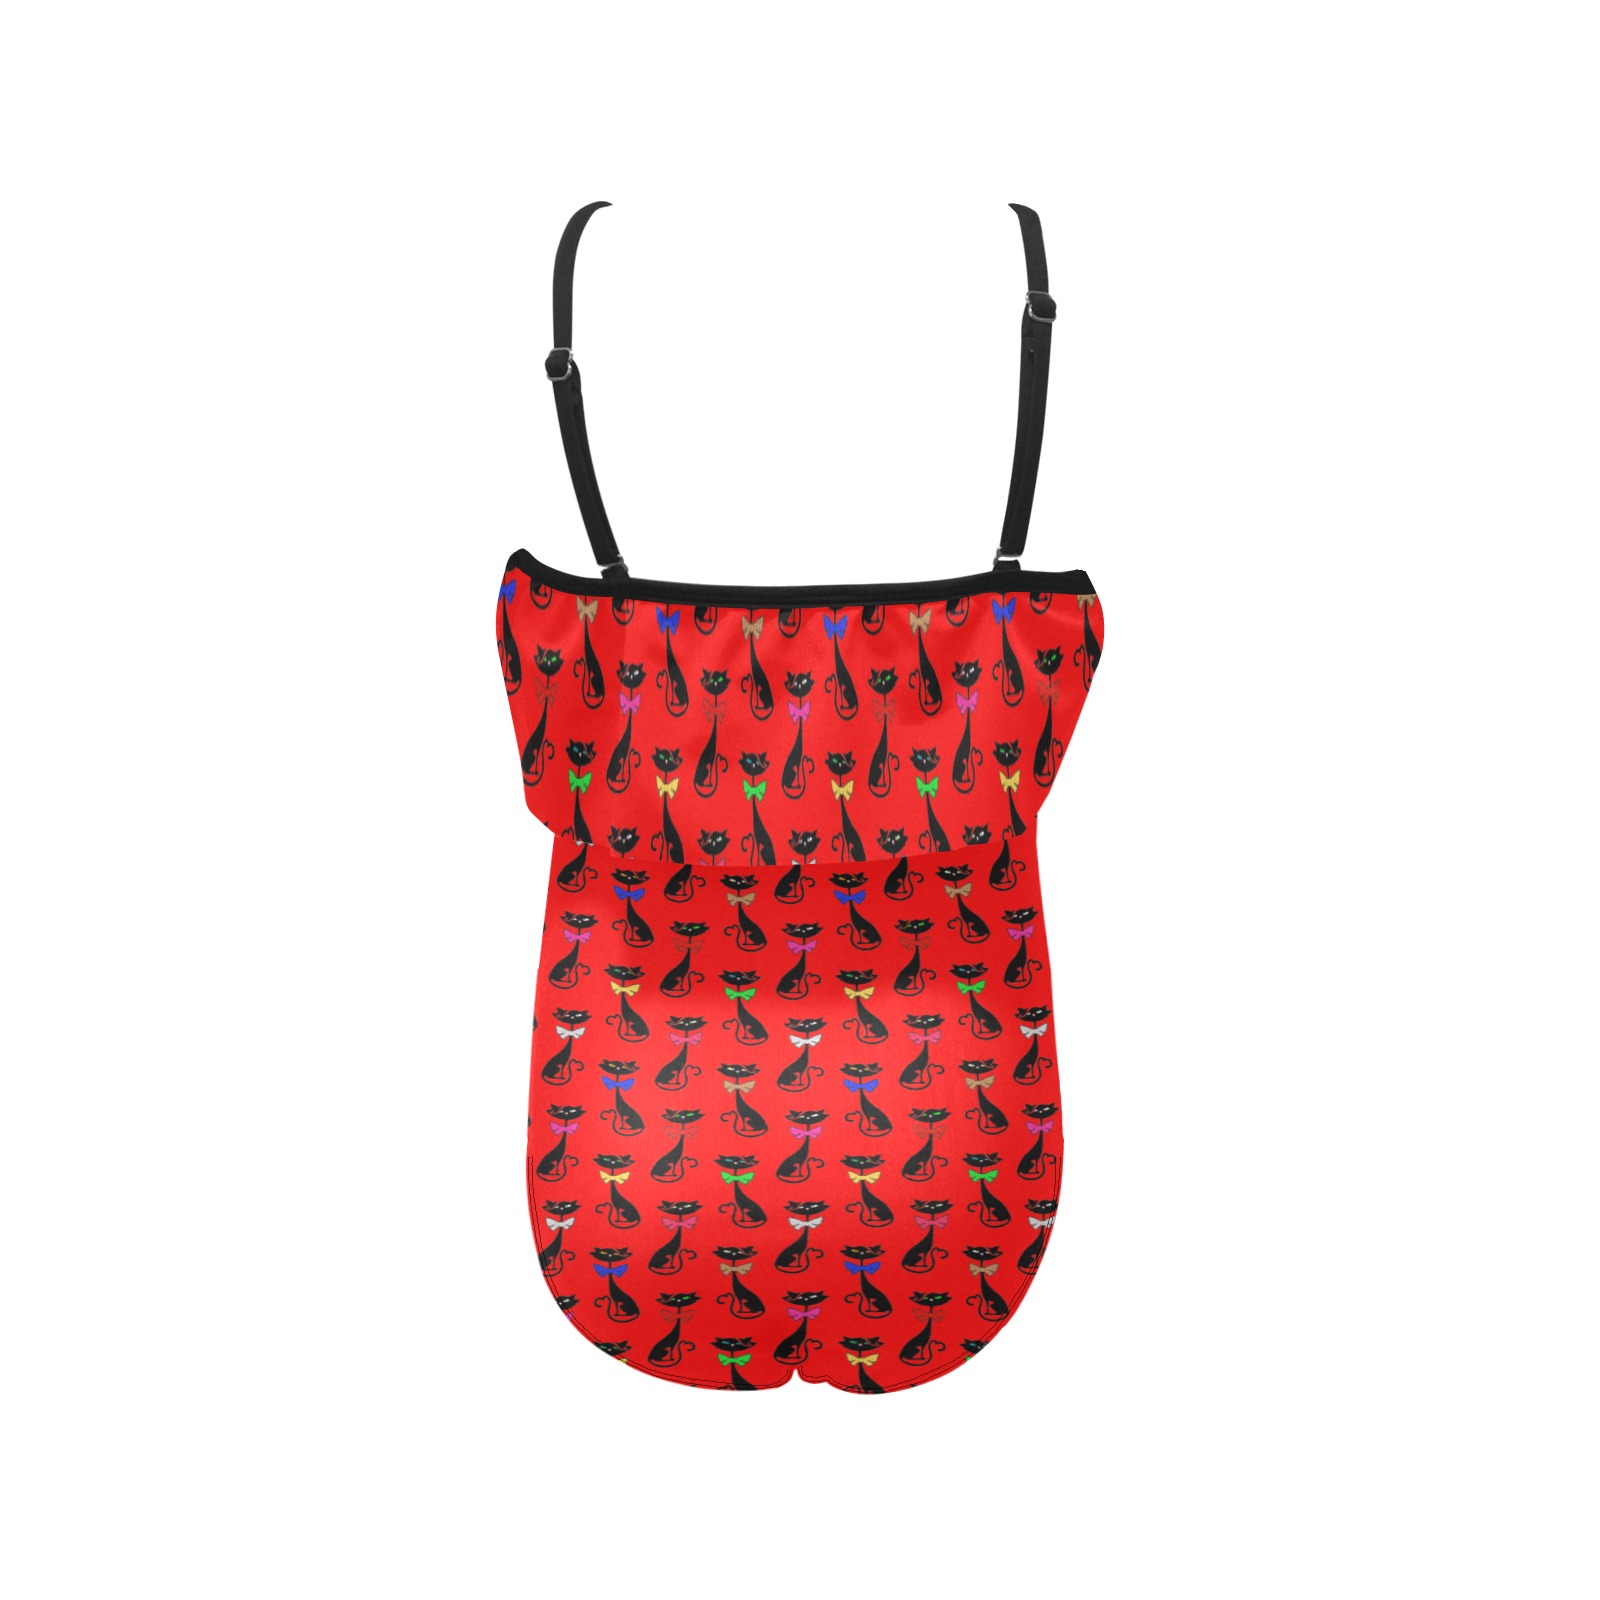 Black Cats Wearing Bow Ties - Red Kids' Spaghetti Strap Ruffle Swimsuit (Model S26)